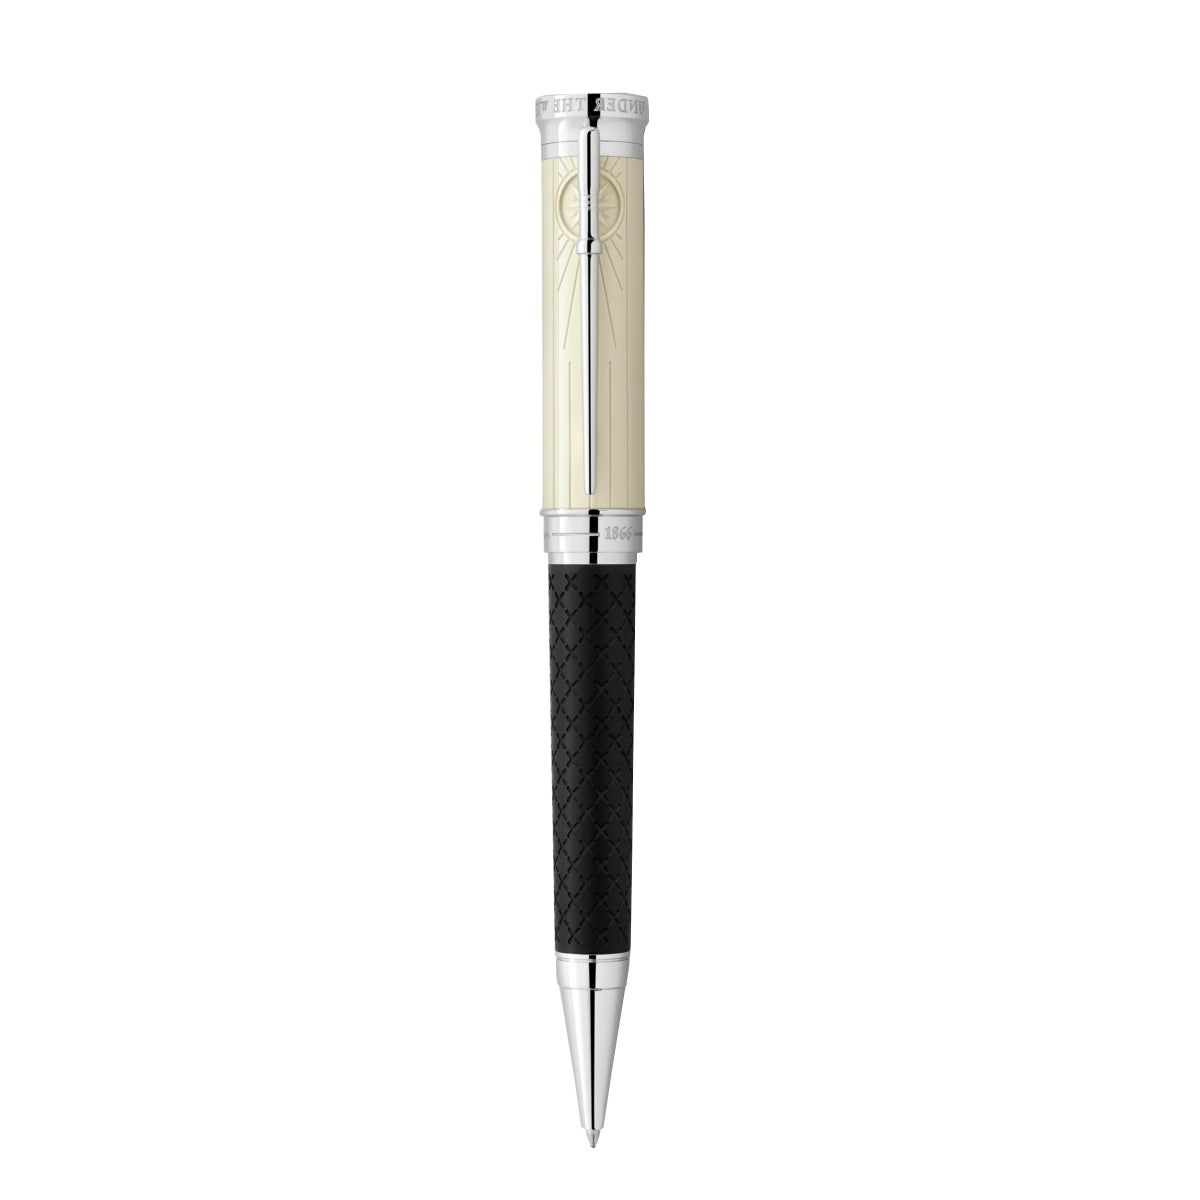 Stylo-bille Writers Edition Hommage aux frères Grimm Limited